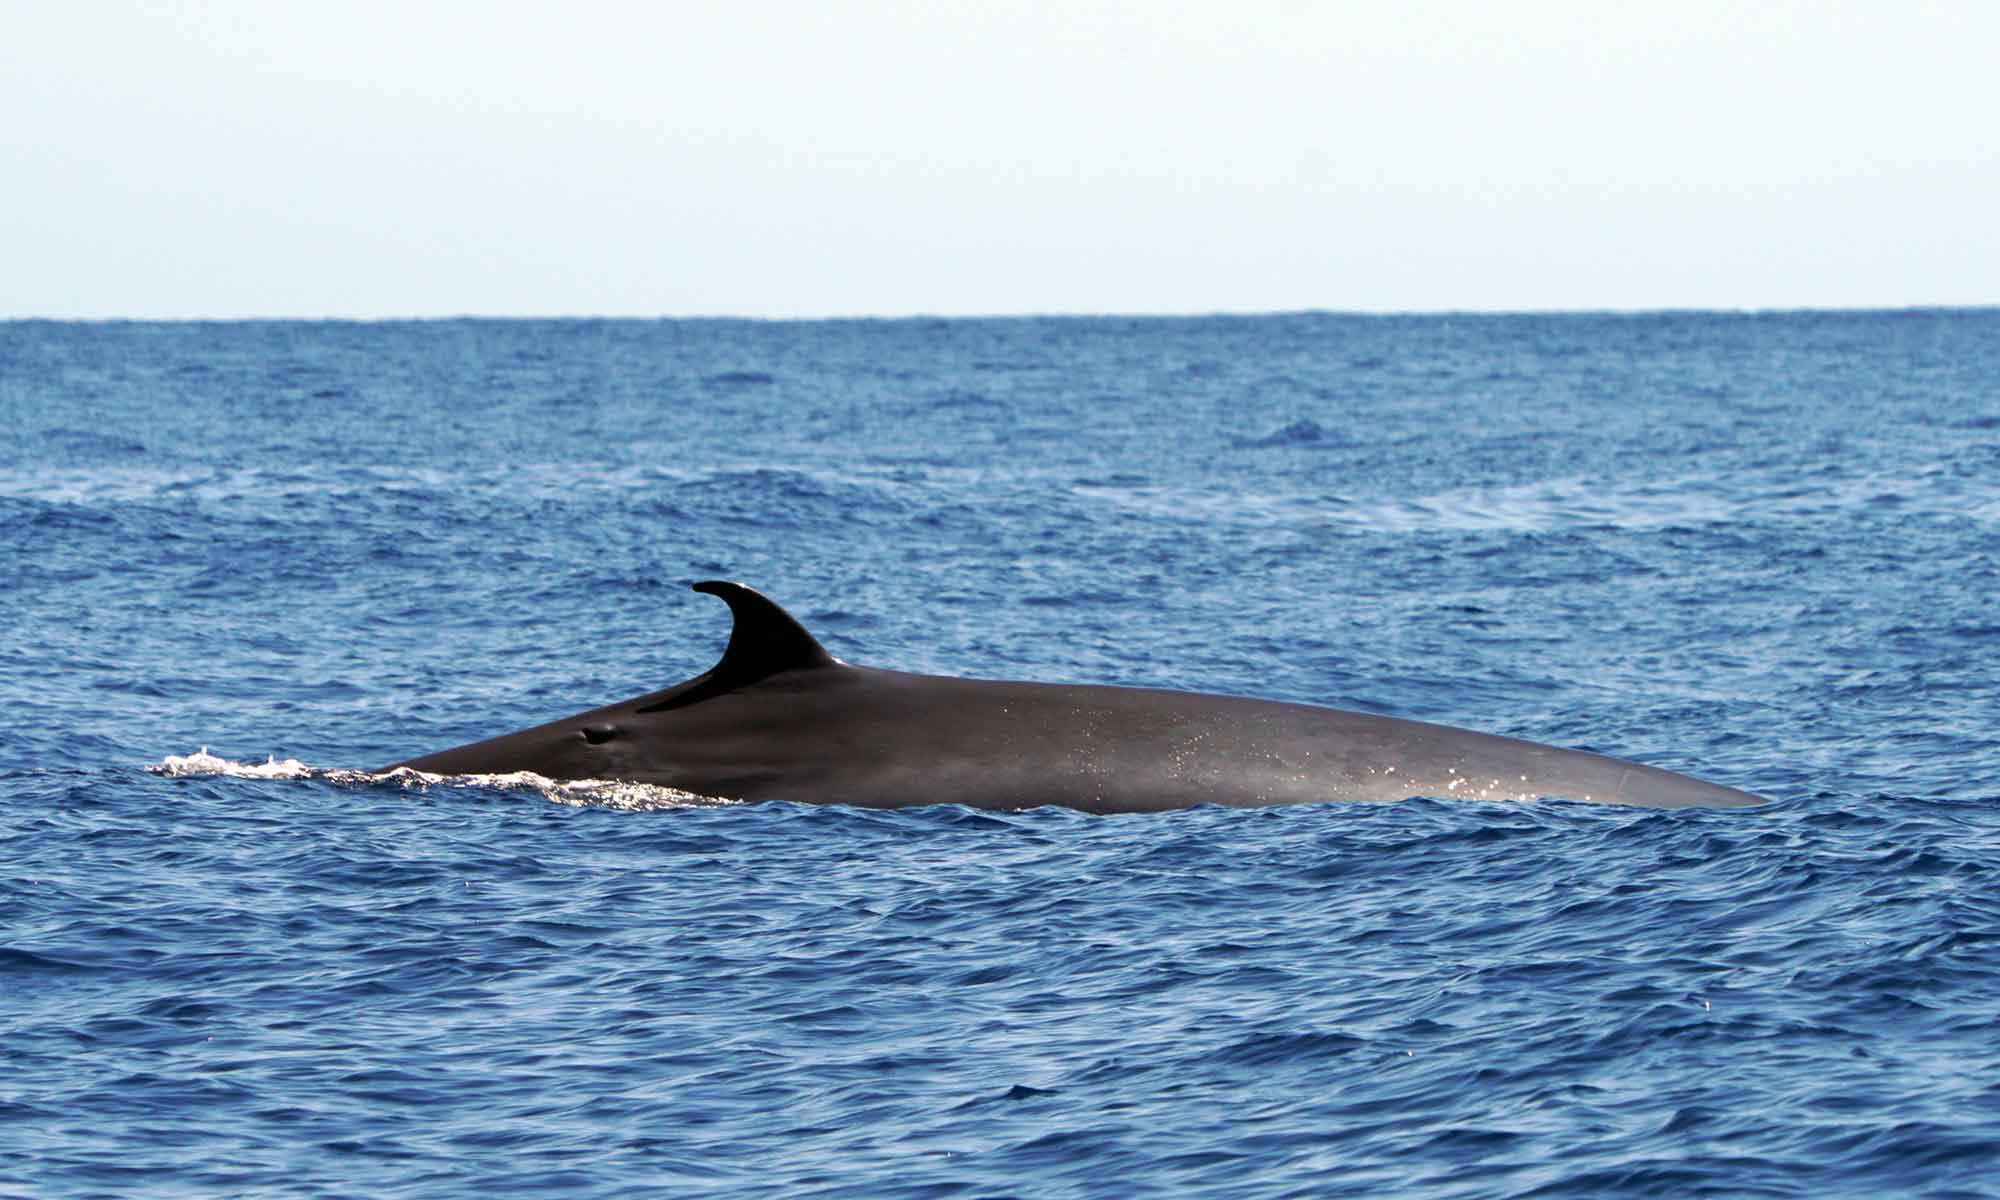 The Sei whale is a large baleen whale that can be seen offshore of Funchal, Madeira.